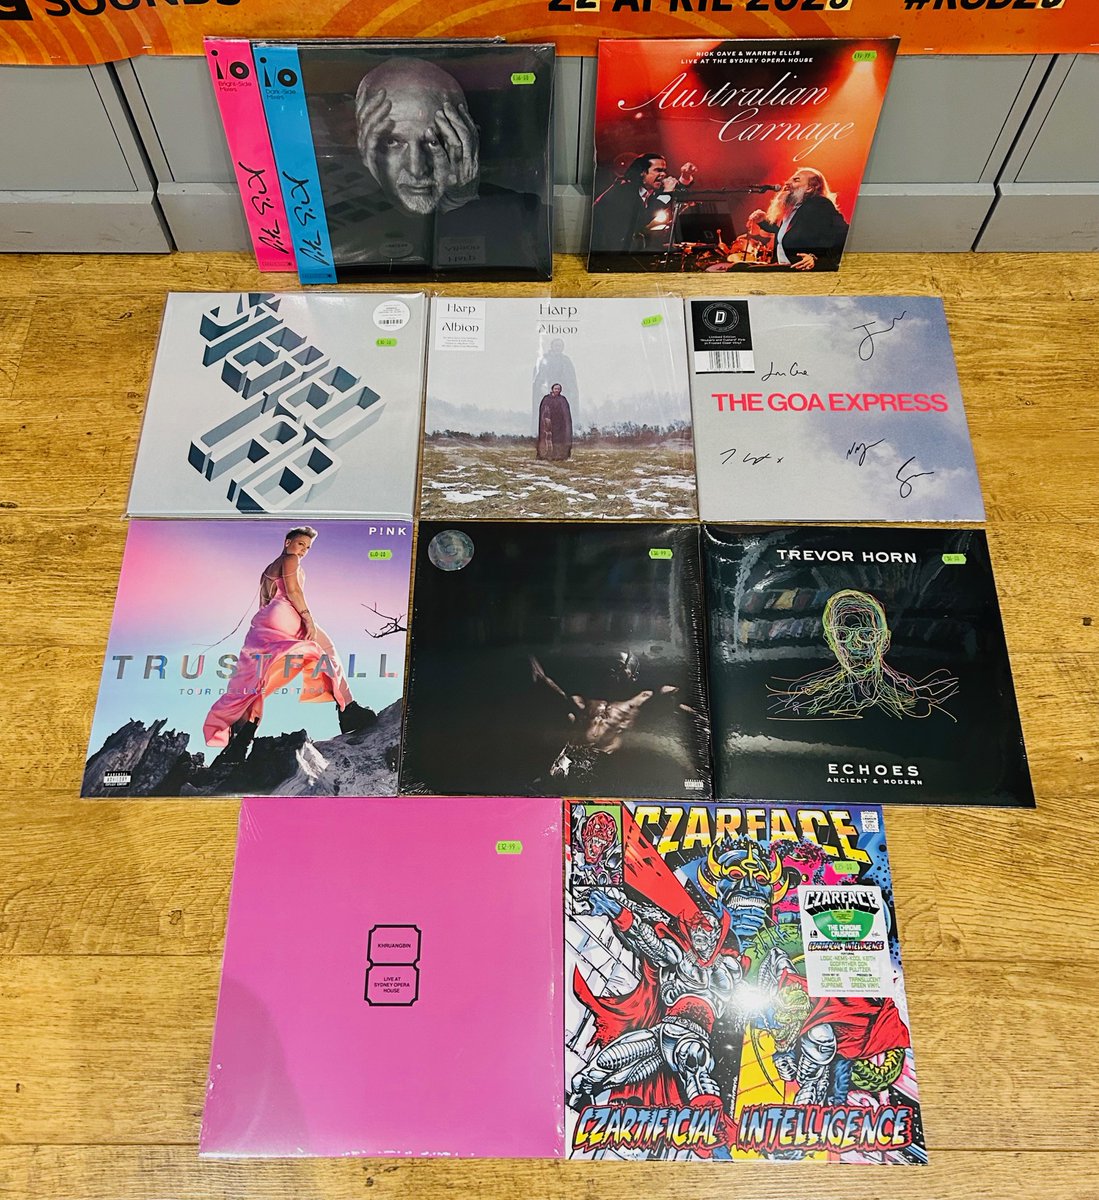 #NewMusicFriday New albums from @itspetergabriel (two different mixes), Harp (Tim Smith, formerly of Midlake), live albums from @nickcave & @warrenellis13 and @Khruangbin plus release day for the sold out @dinkededition from @TheGoaExpress and more #WaxUpdate